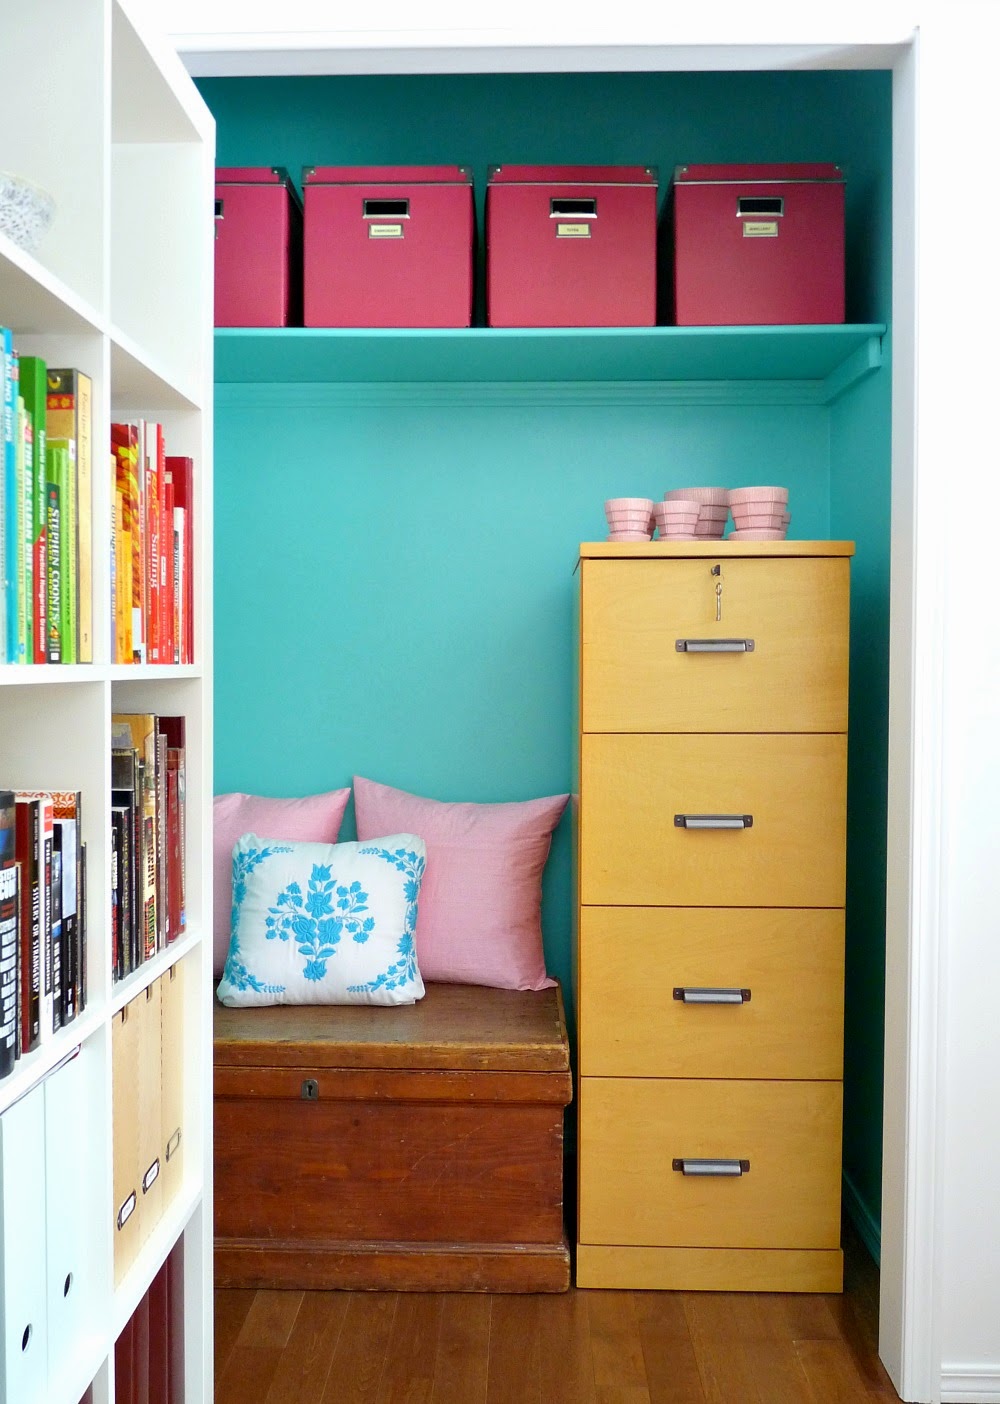 A Good Look for the Office Nook